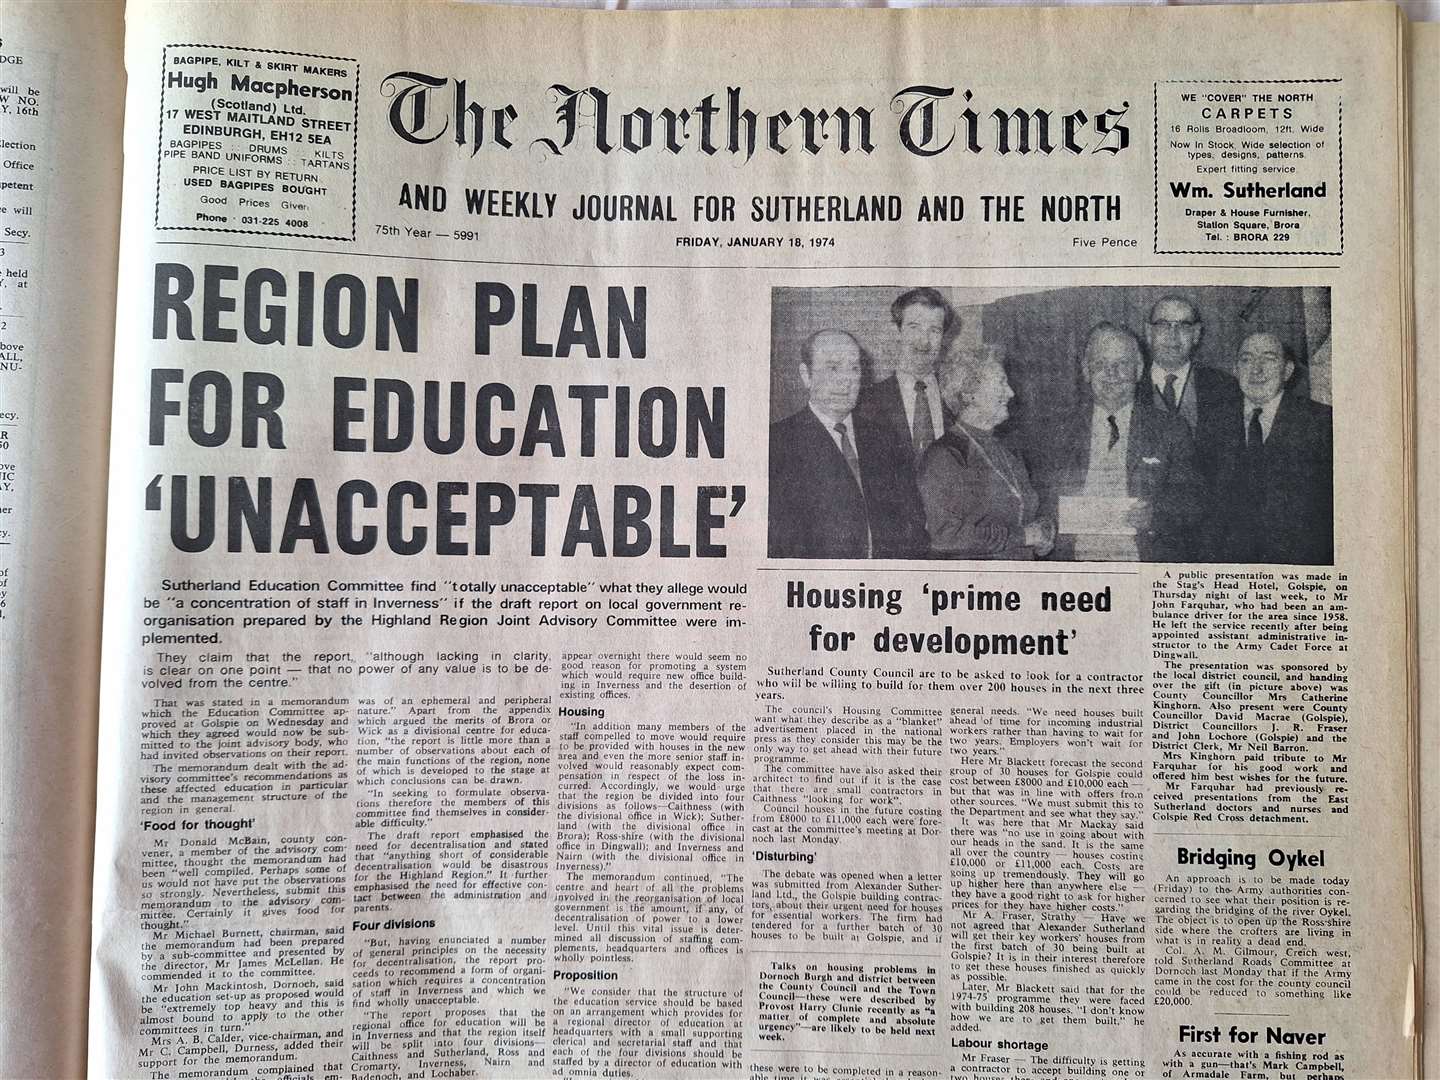 The edition of January 18, 1974.